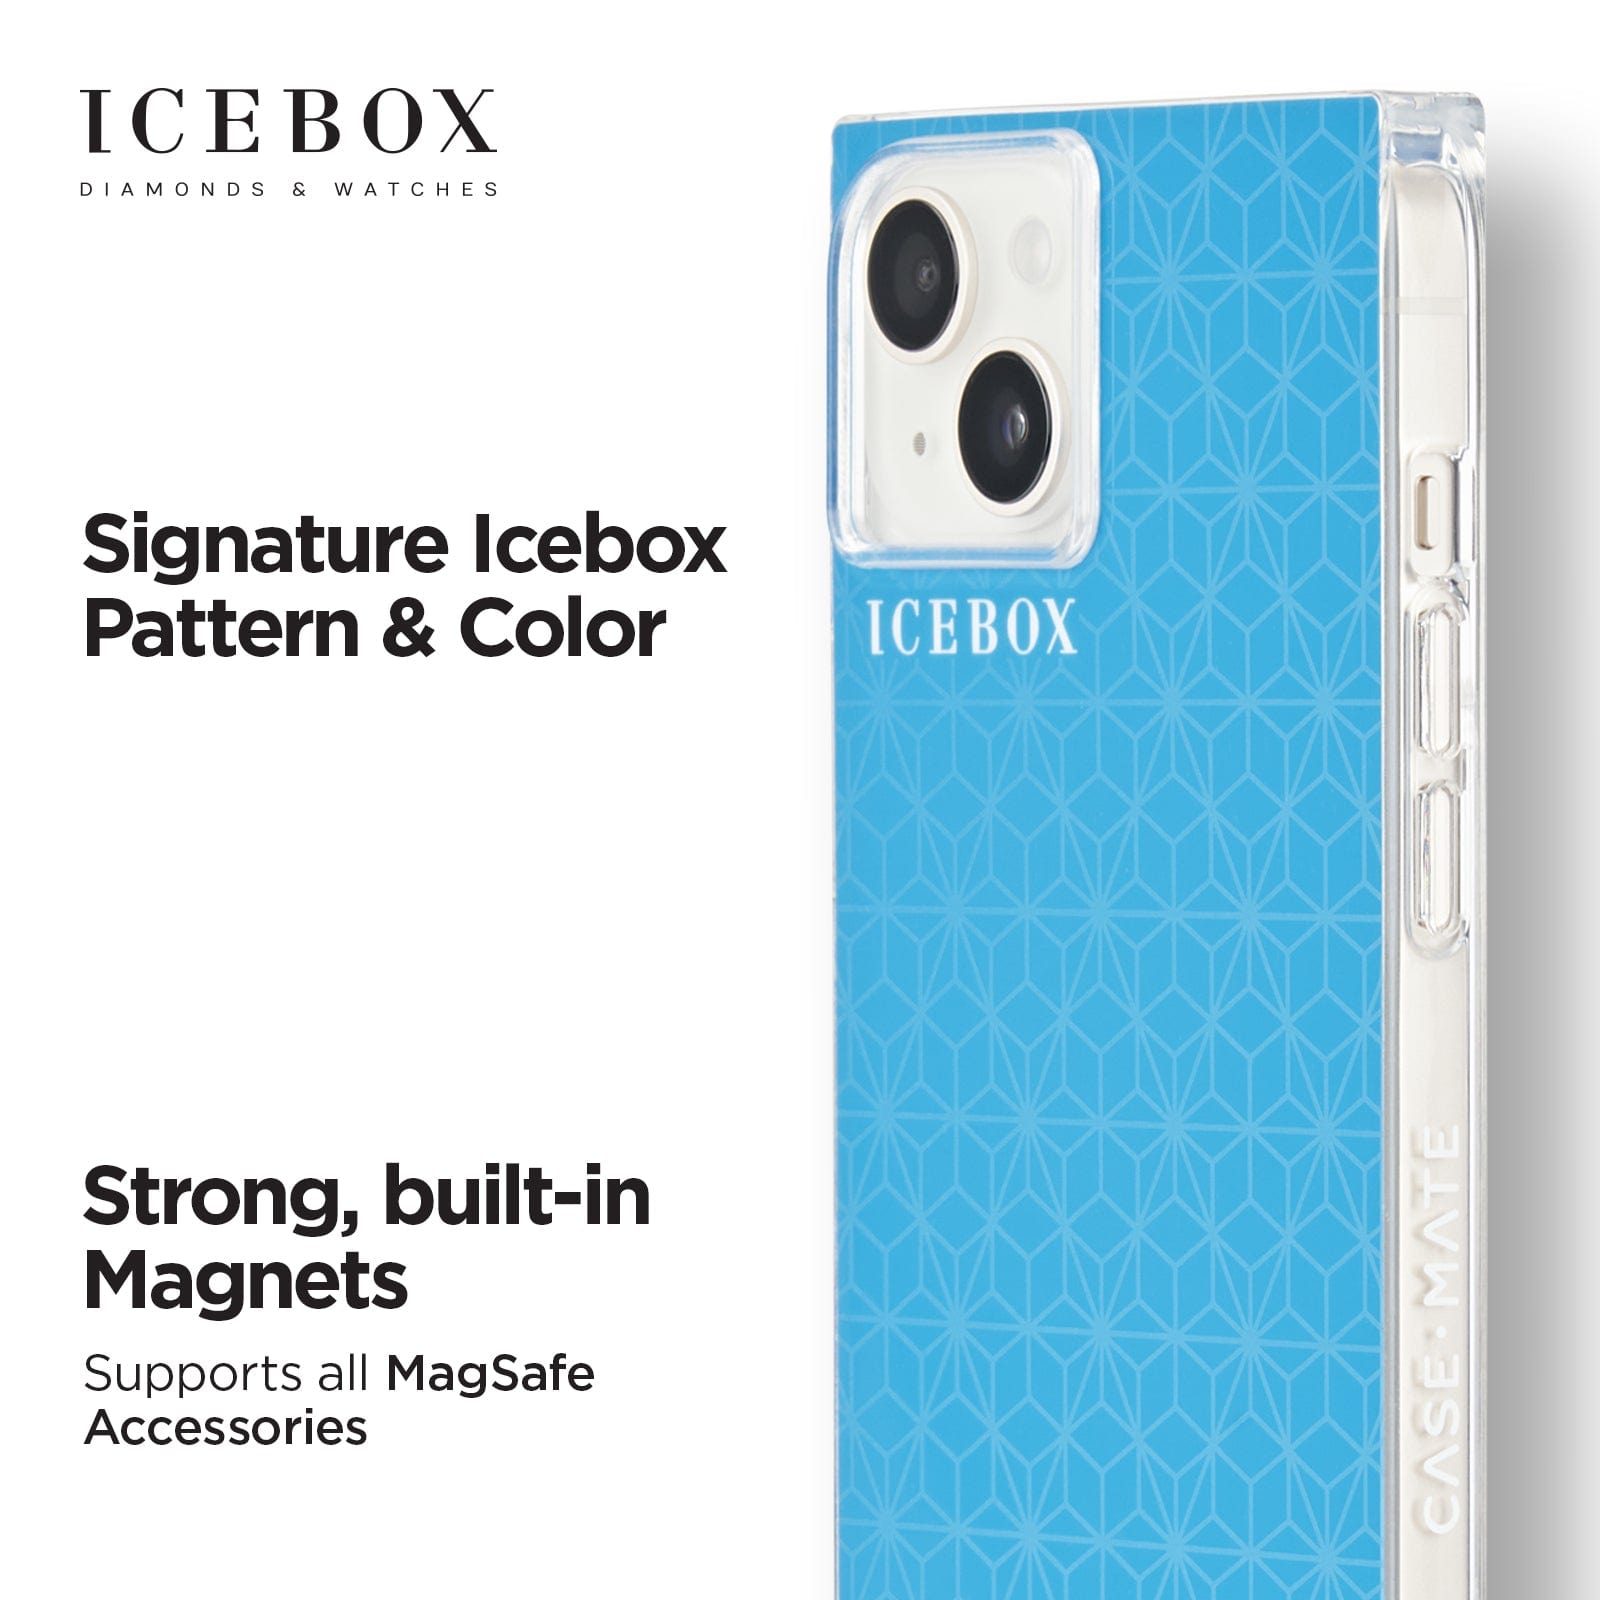 SIGNATURE ICEBOX PATTERN AND COLOR. STRONG, BUILT-IN MAGNETS SUPPORTS ALL MAGSAFE ACCESSORIES